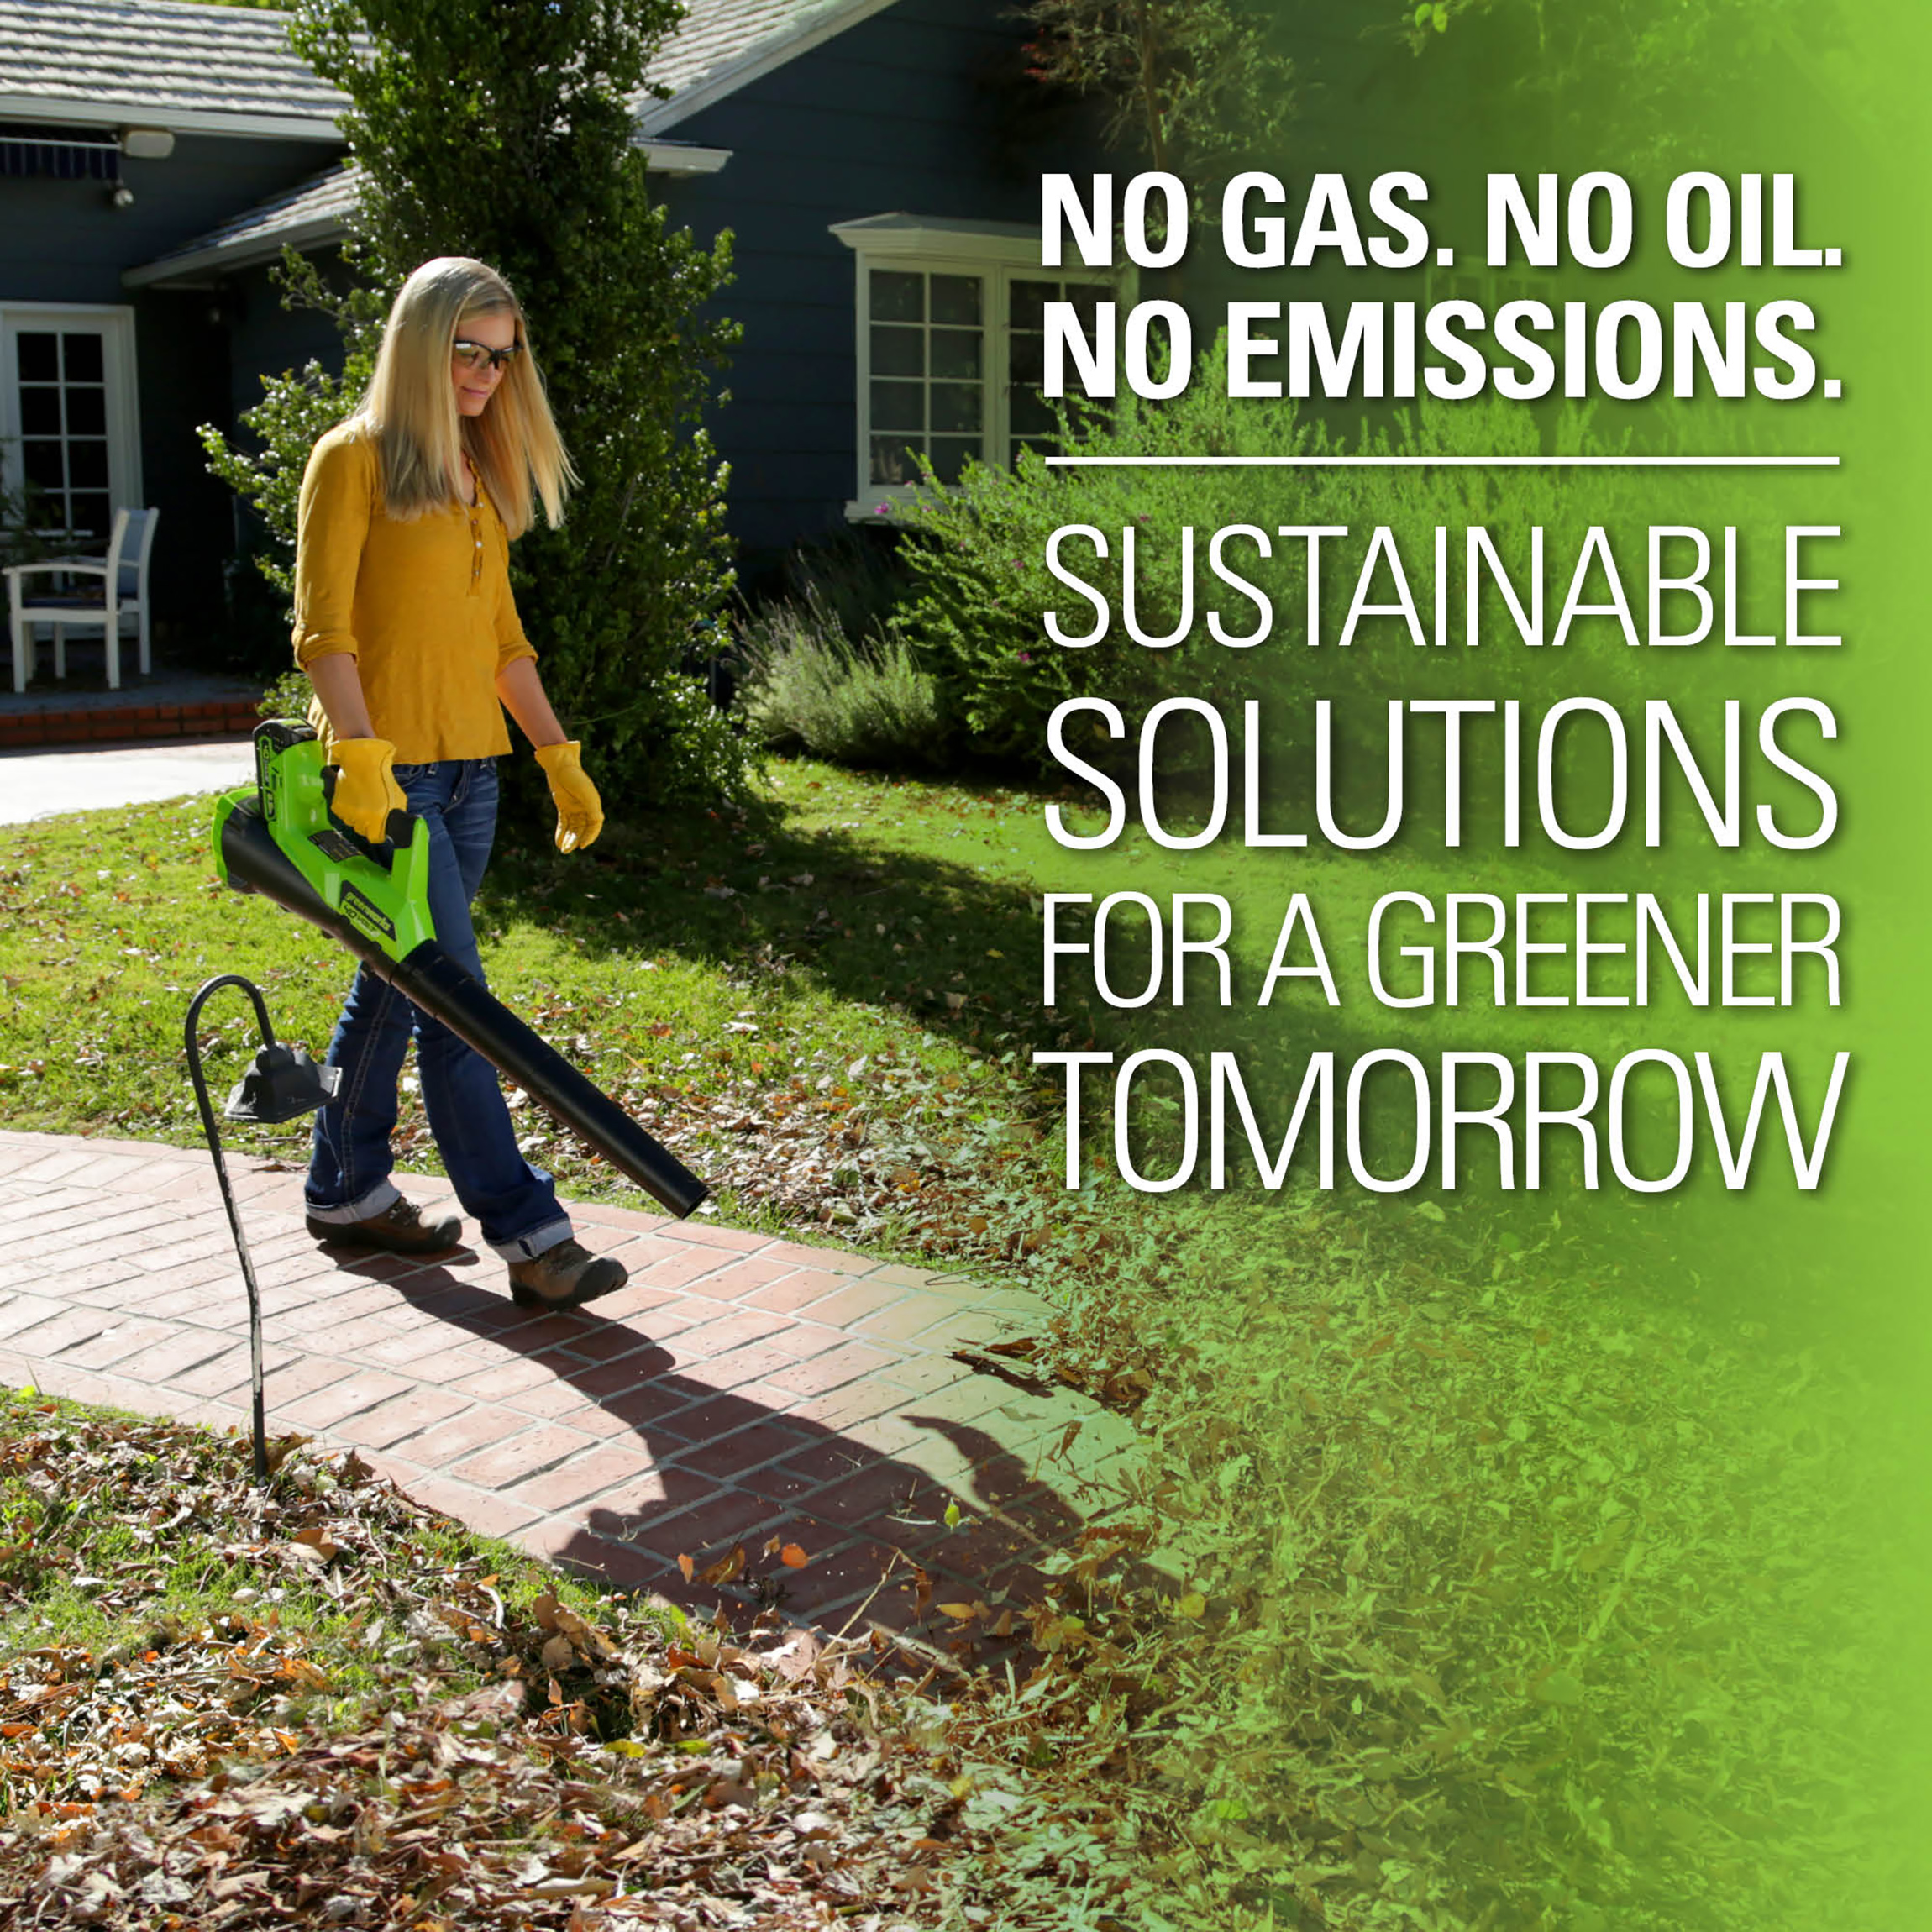 Greenworks 40V 390 CFM Cordless Leaf Blower with 2.5 Ah Battery and Charger， 2400802